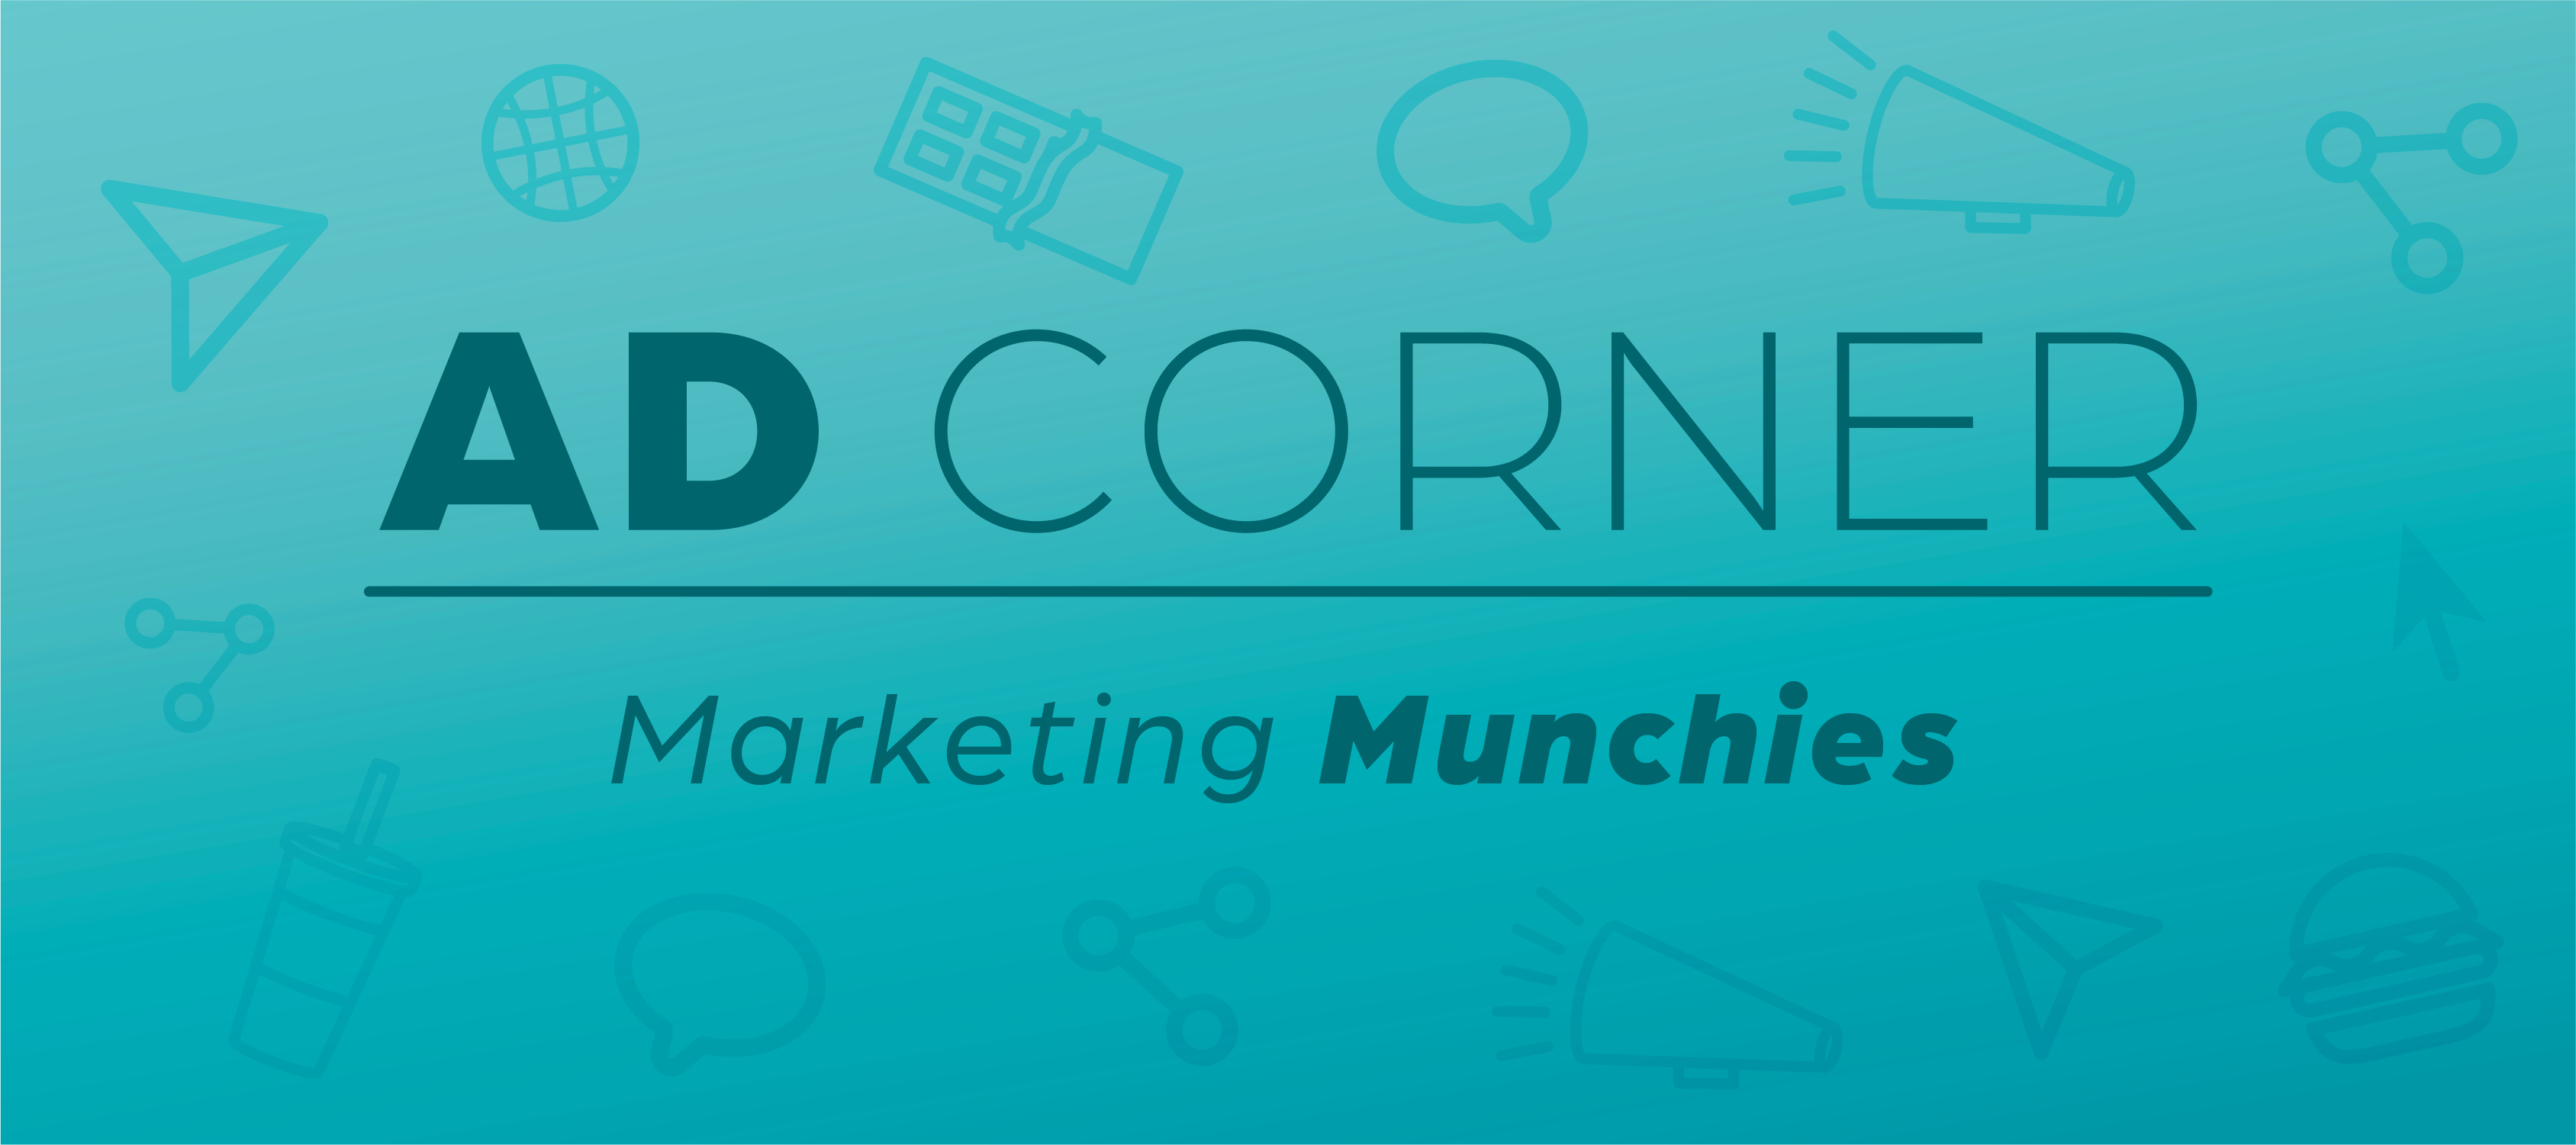 Header image that says "Ad Corner: Marketing Munchies" surrounded by a mix of food and marketing icons